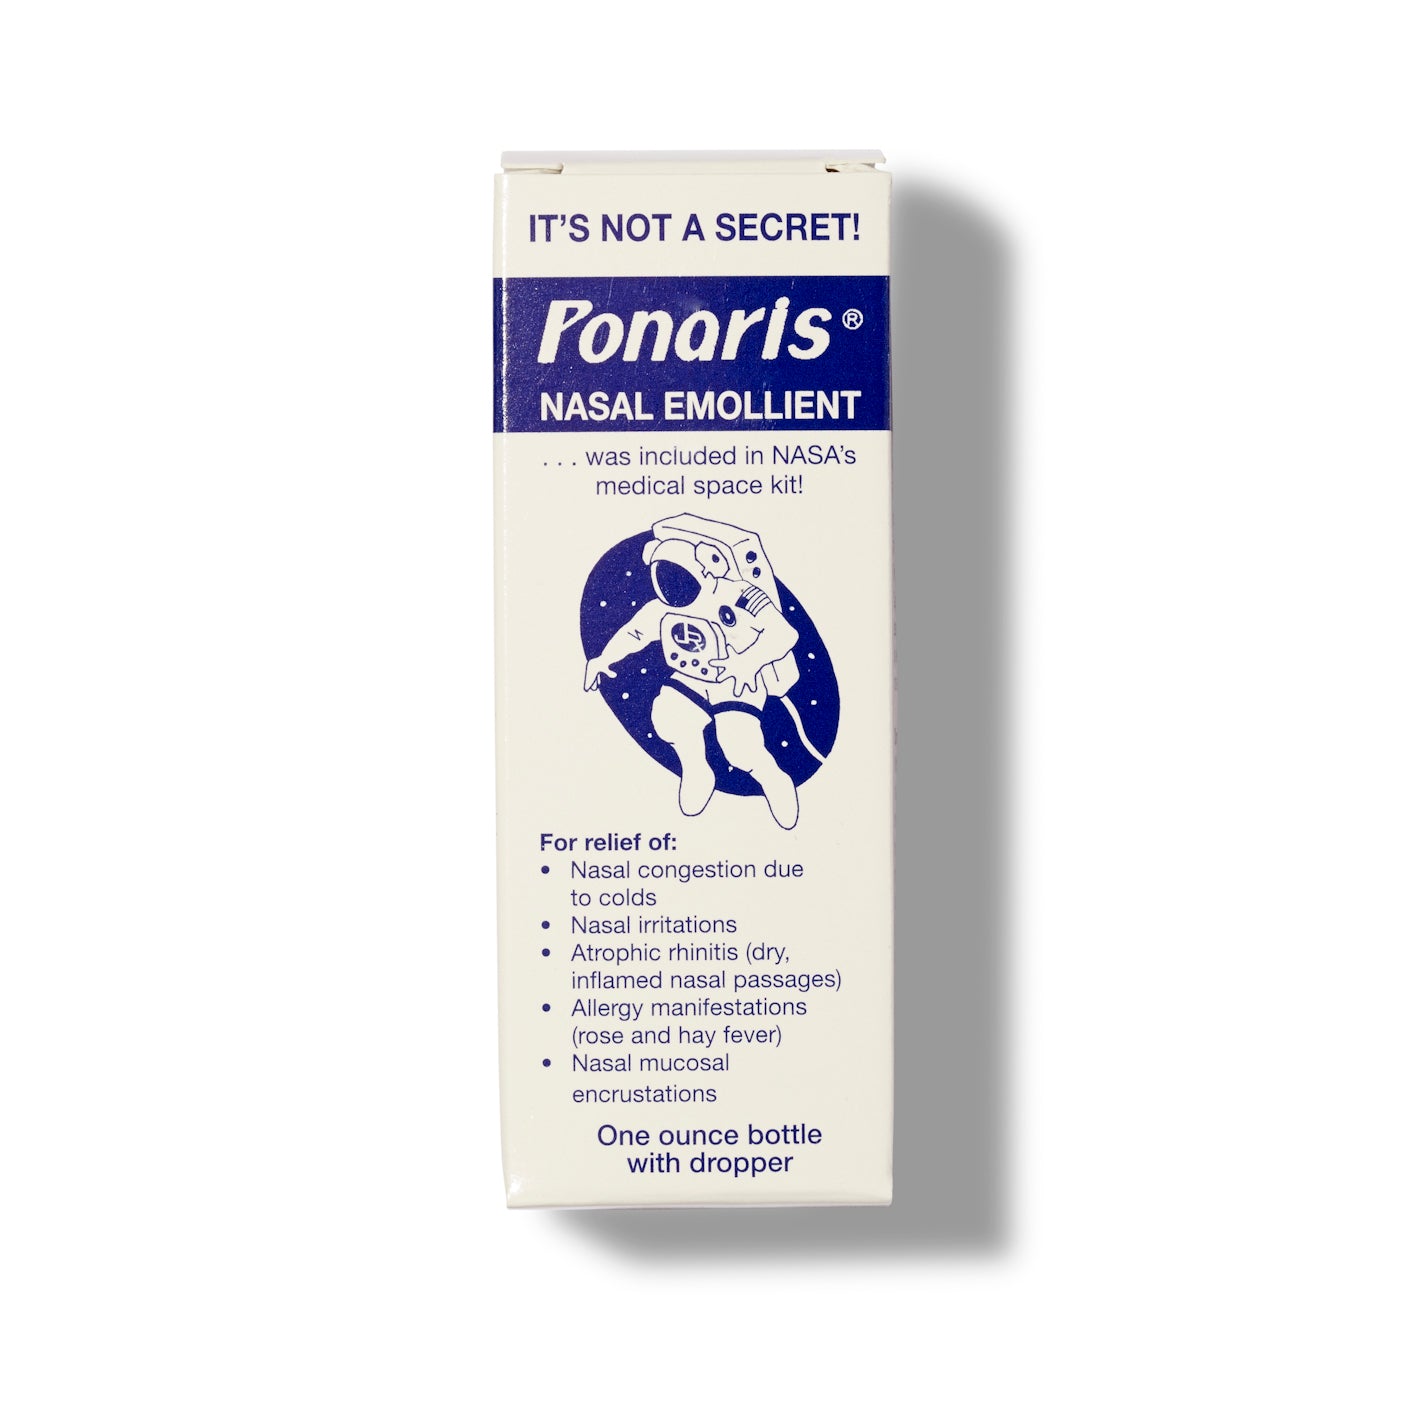 Packaging of the Ponaris Nasal Emollient with an illustration of an astronaut in space.